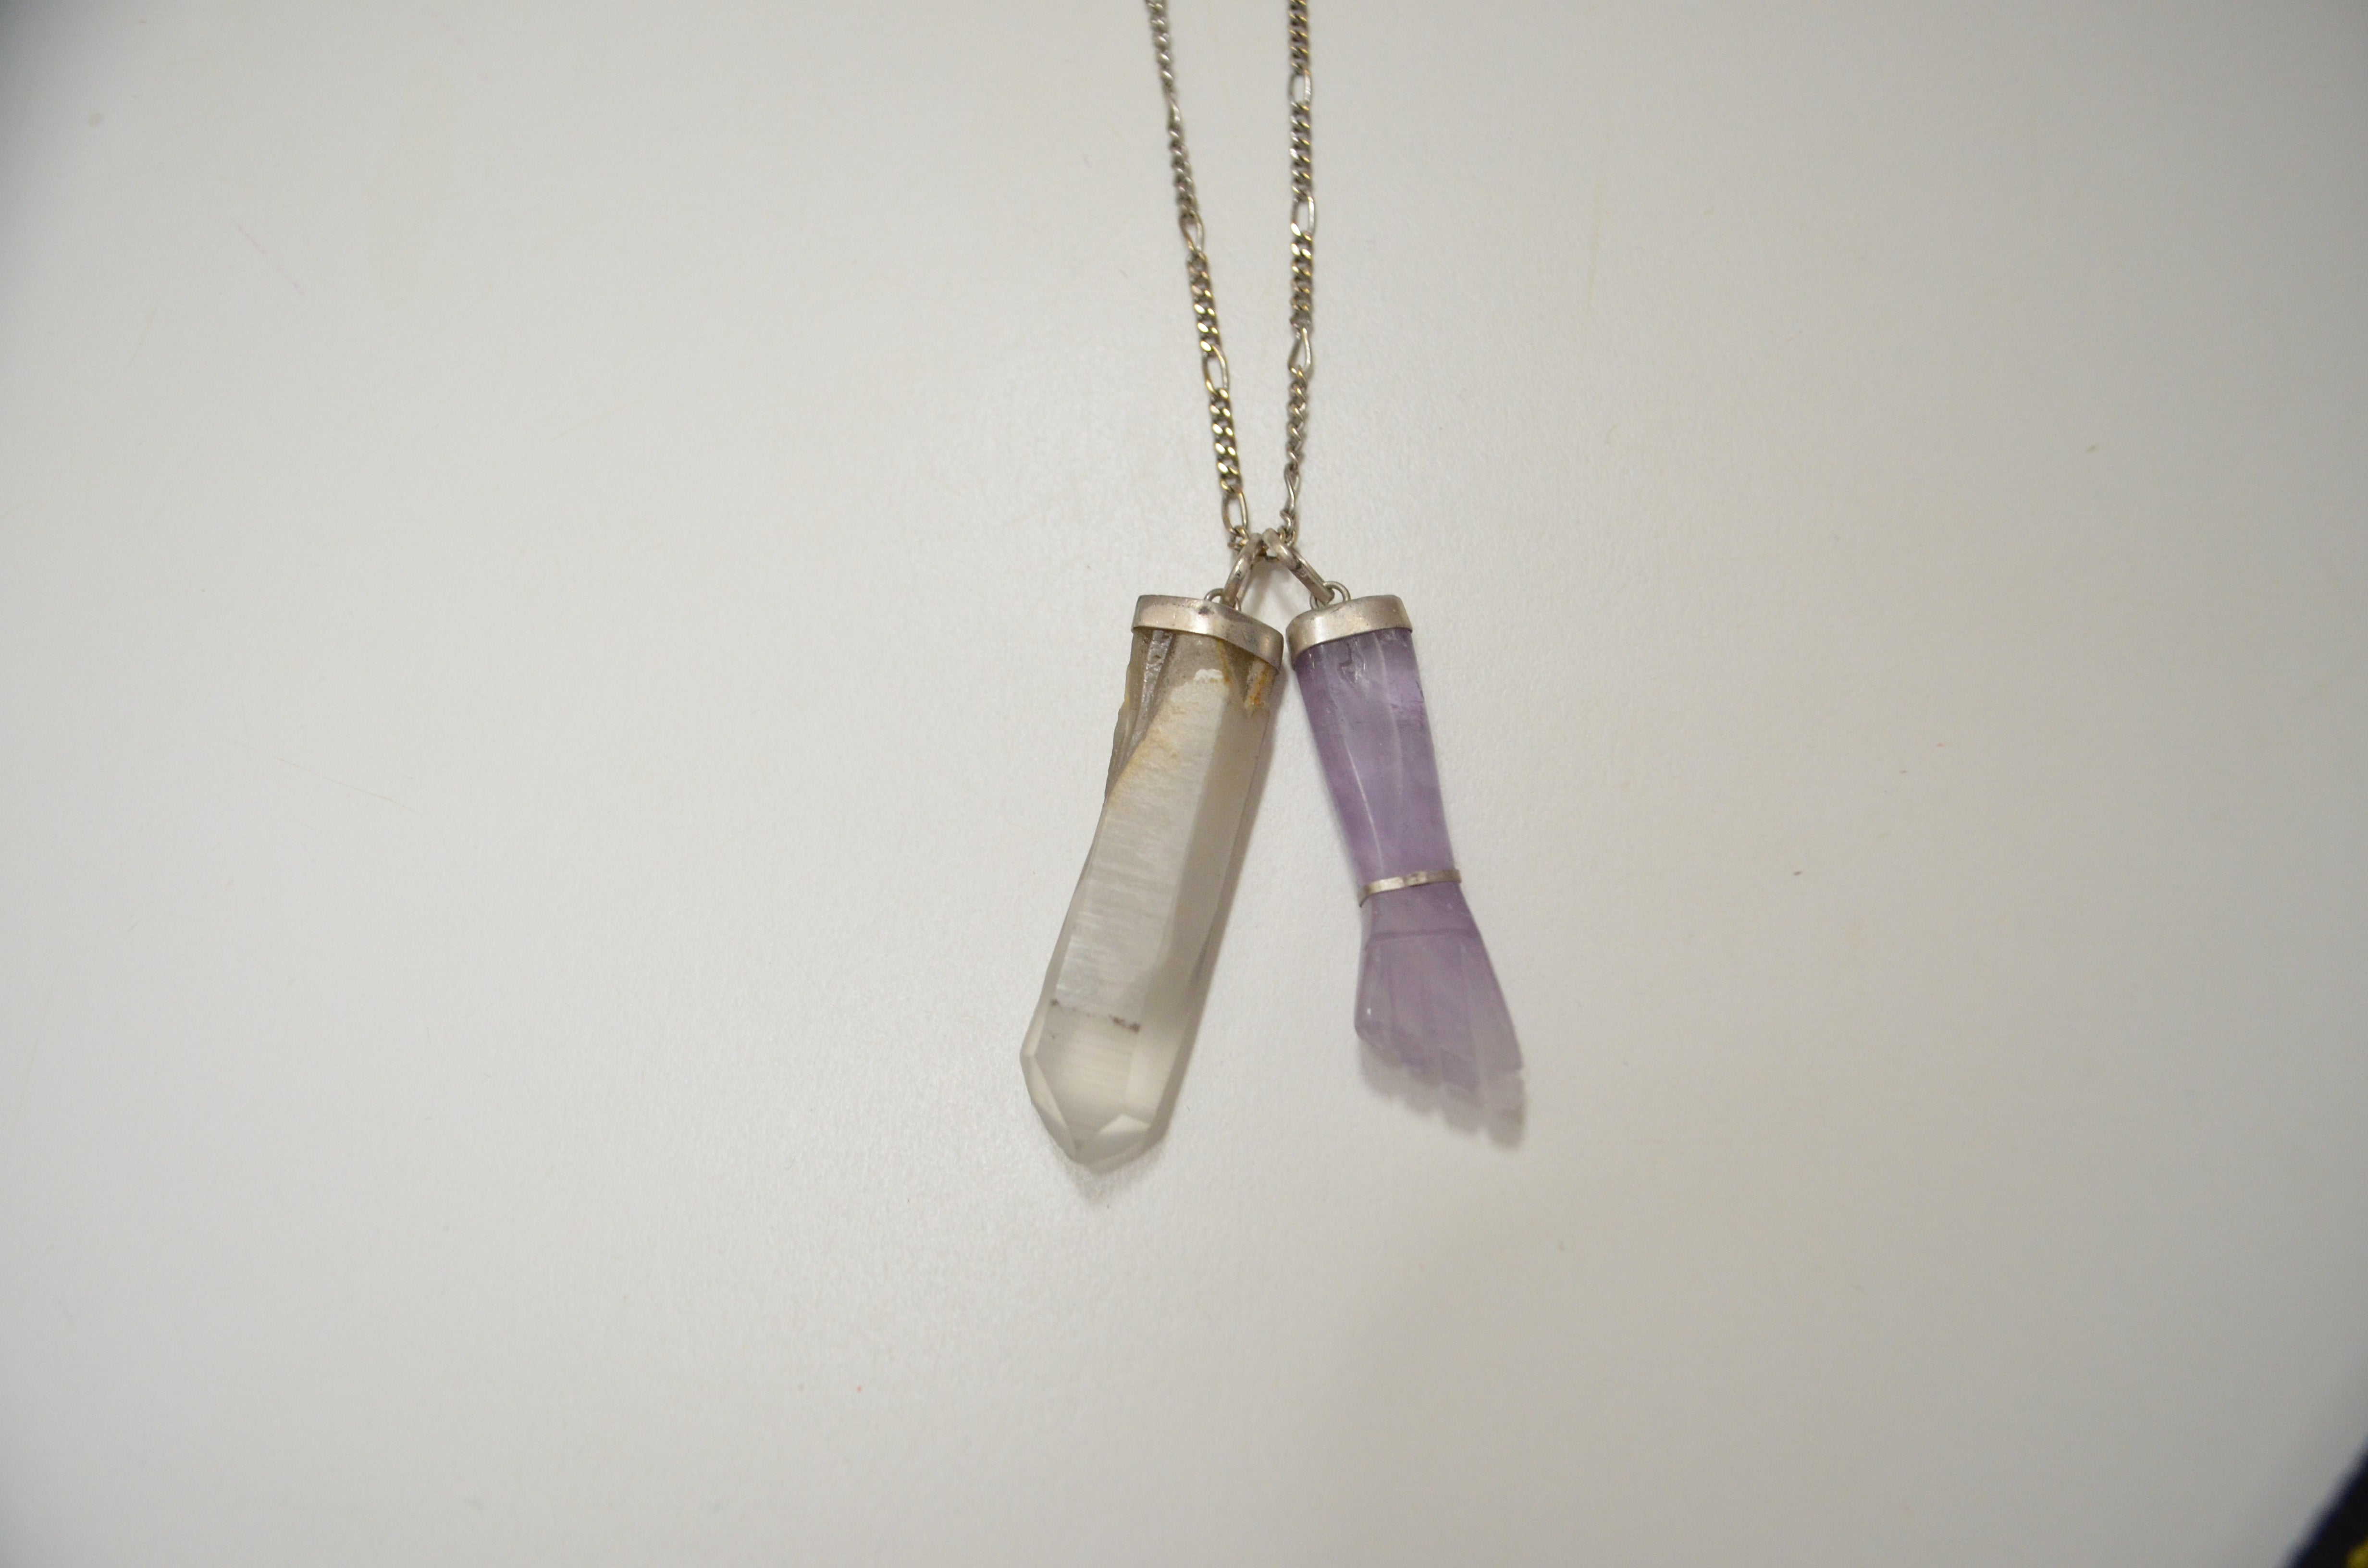 Brazilian Amethyst Mano fig hand pendant and Crystal Selenite stone pendant with silver plated cap